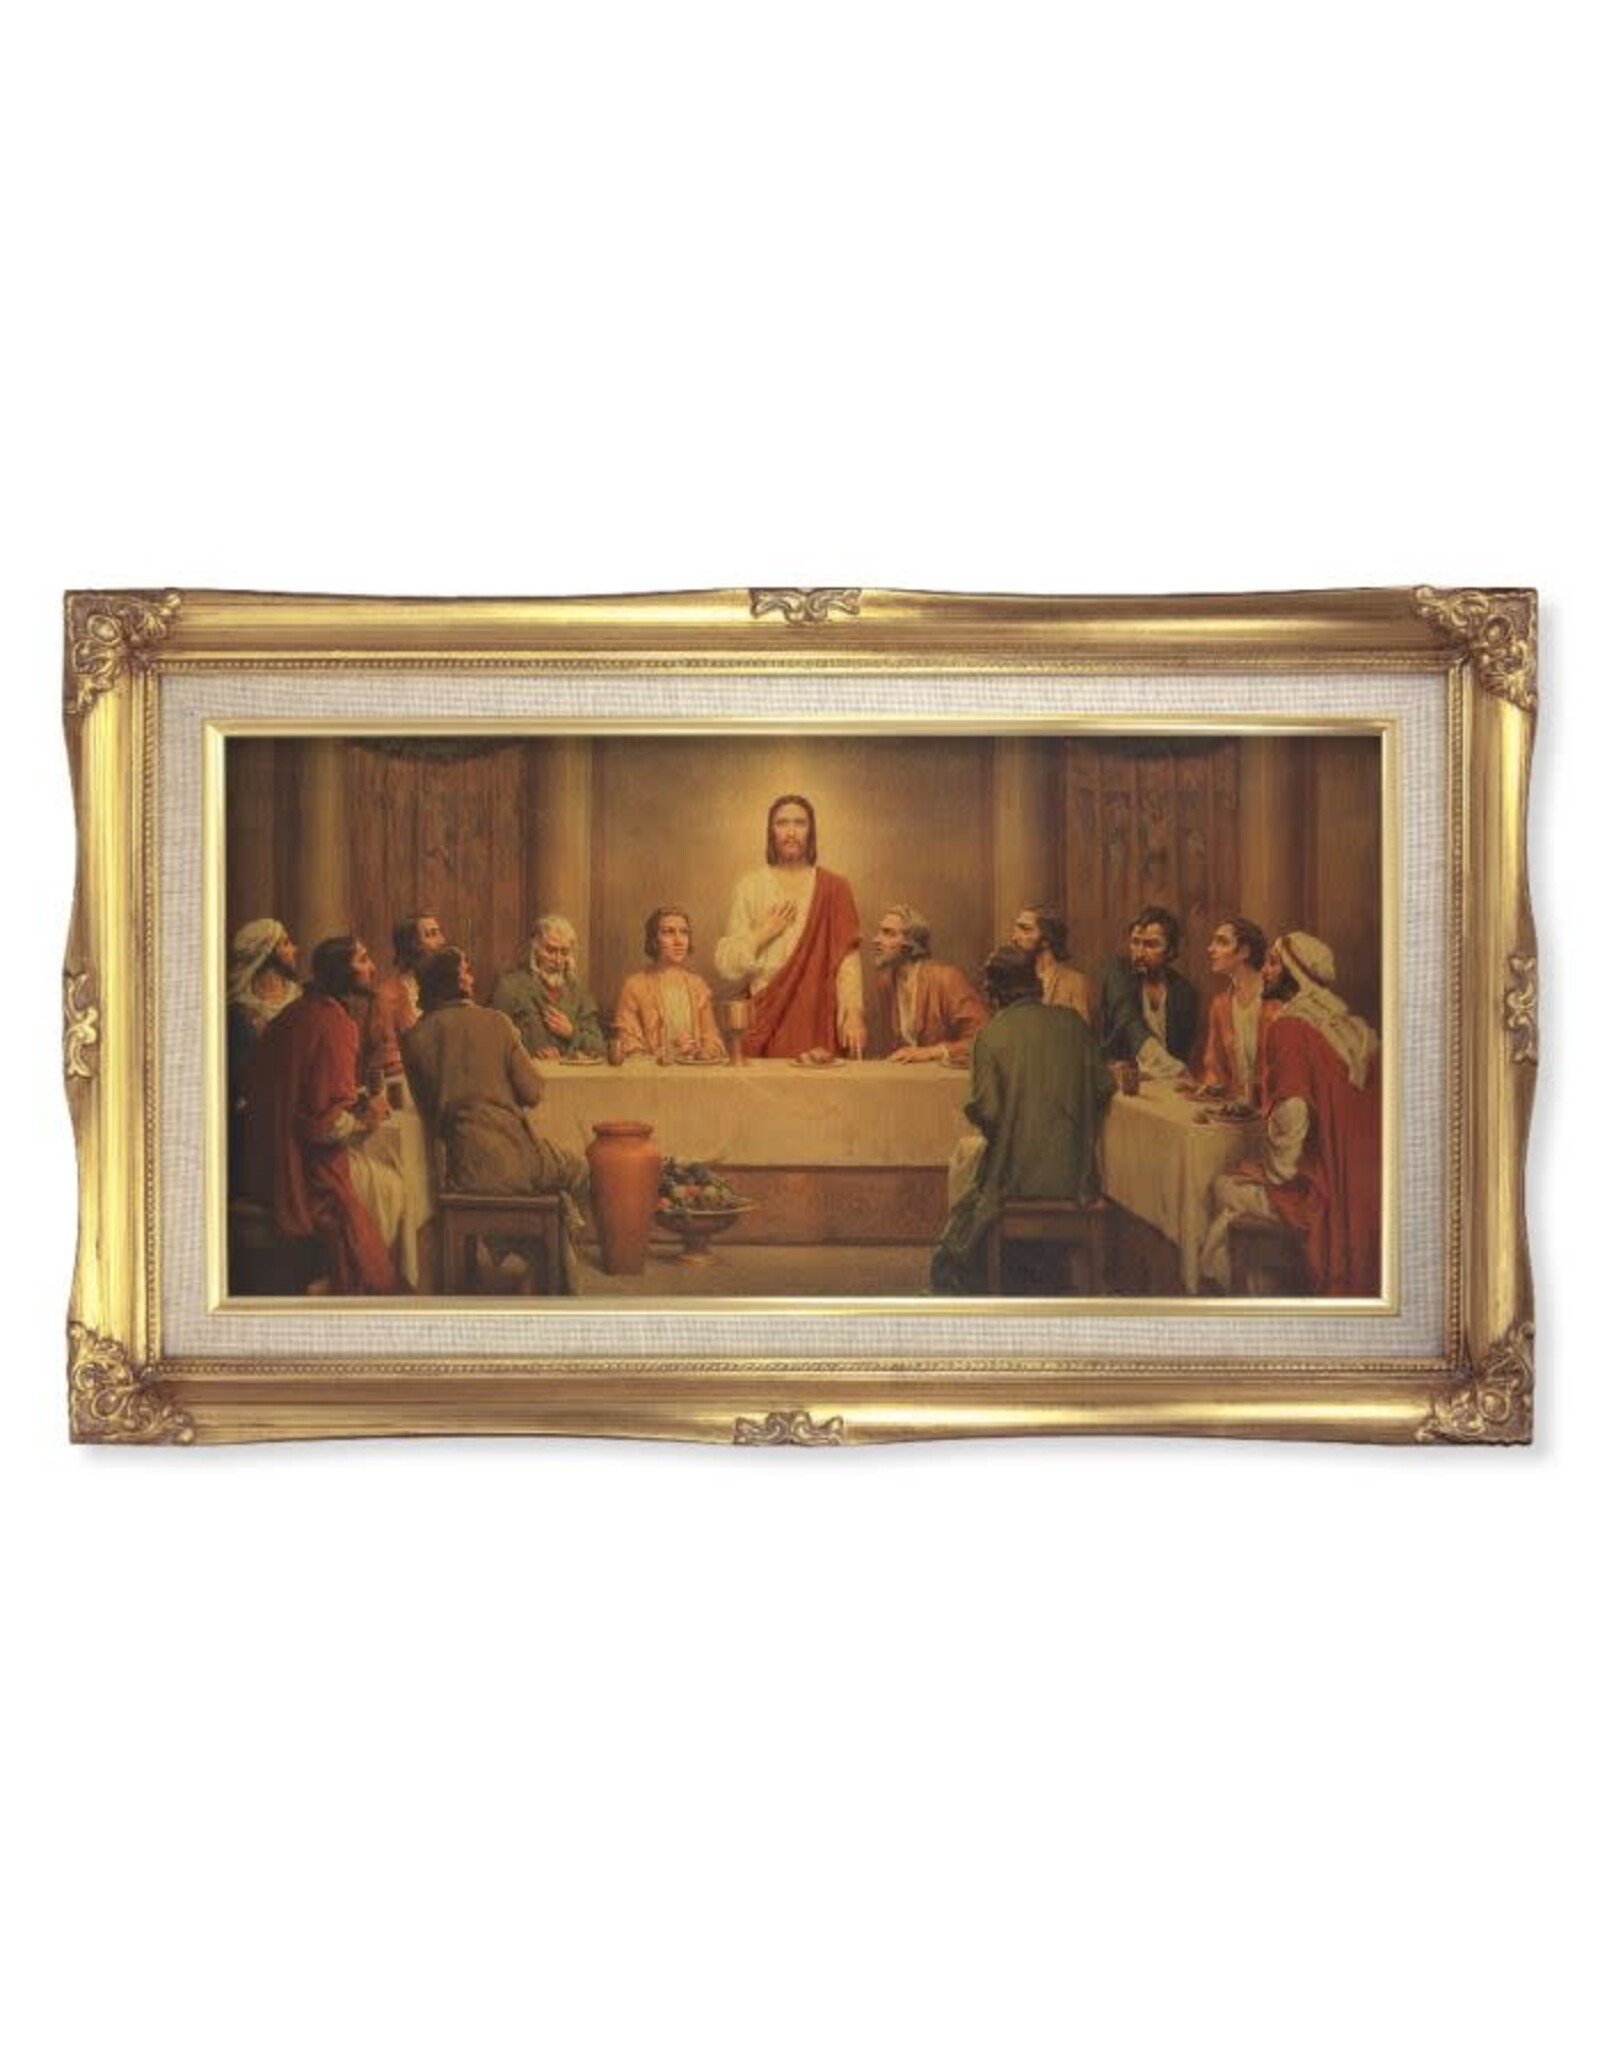 Hirten Last Supper Picture - Gold Leaf Wood Frame, Chambers (11-1/4 x 18-1/2")